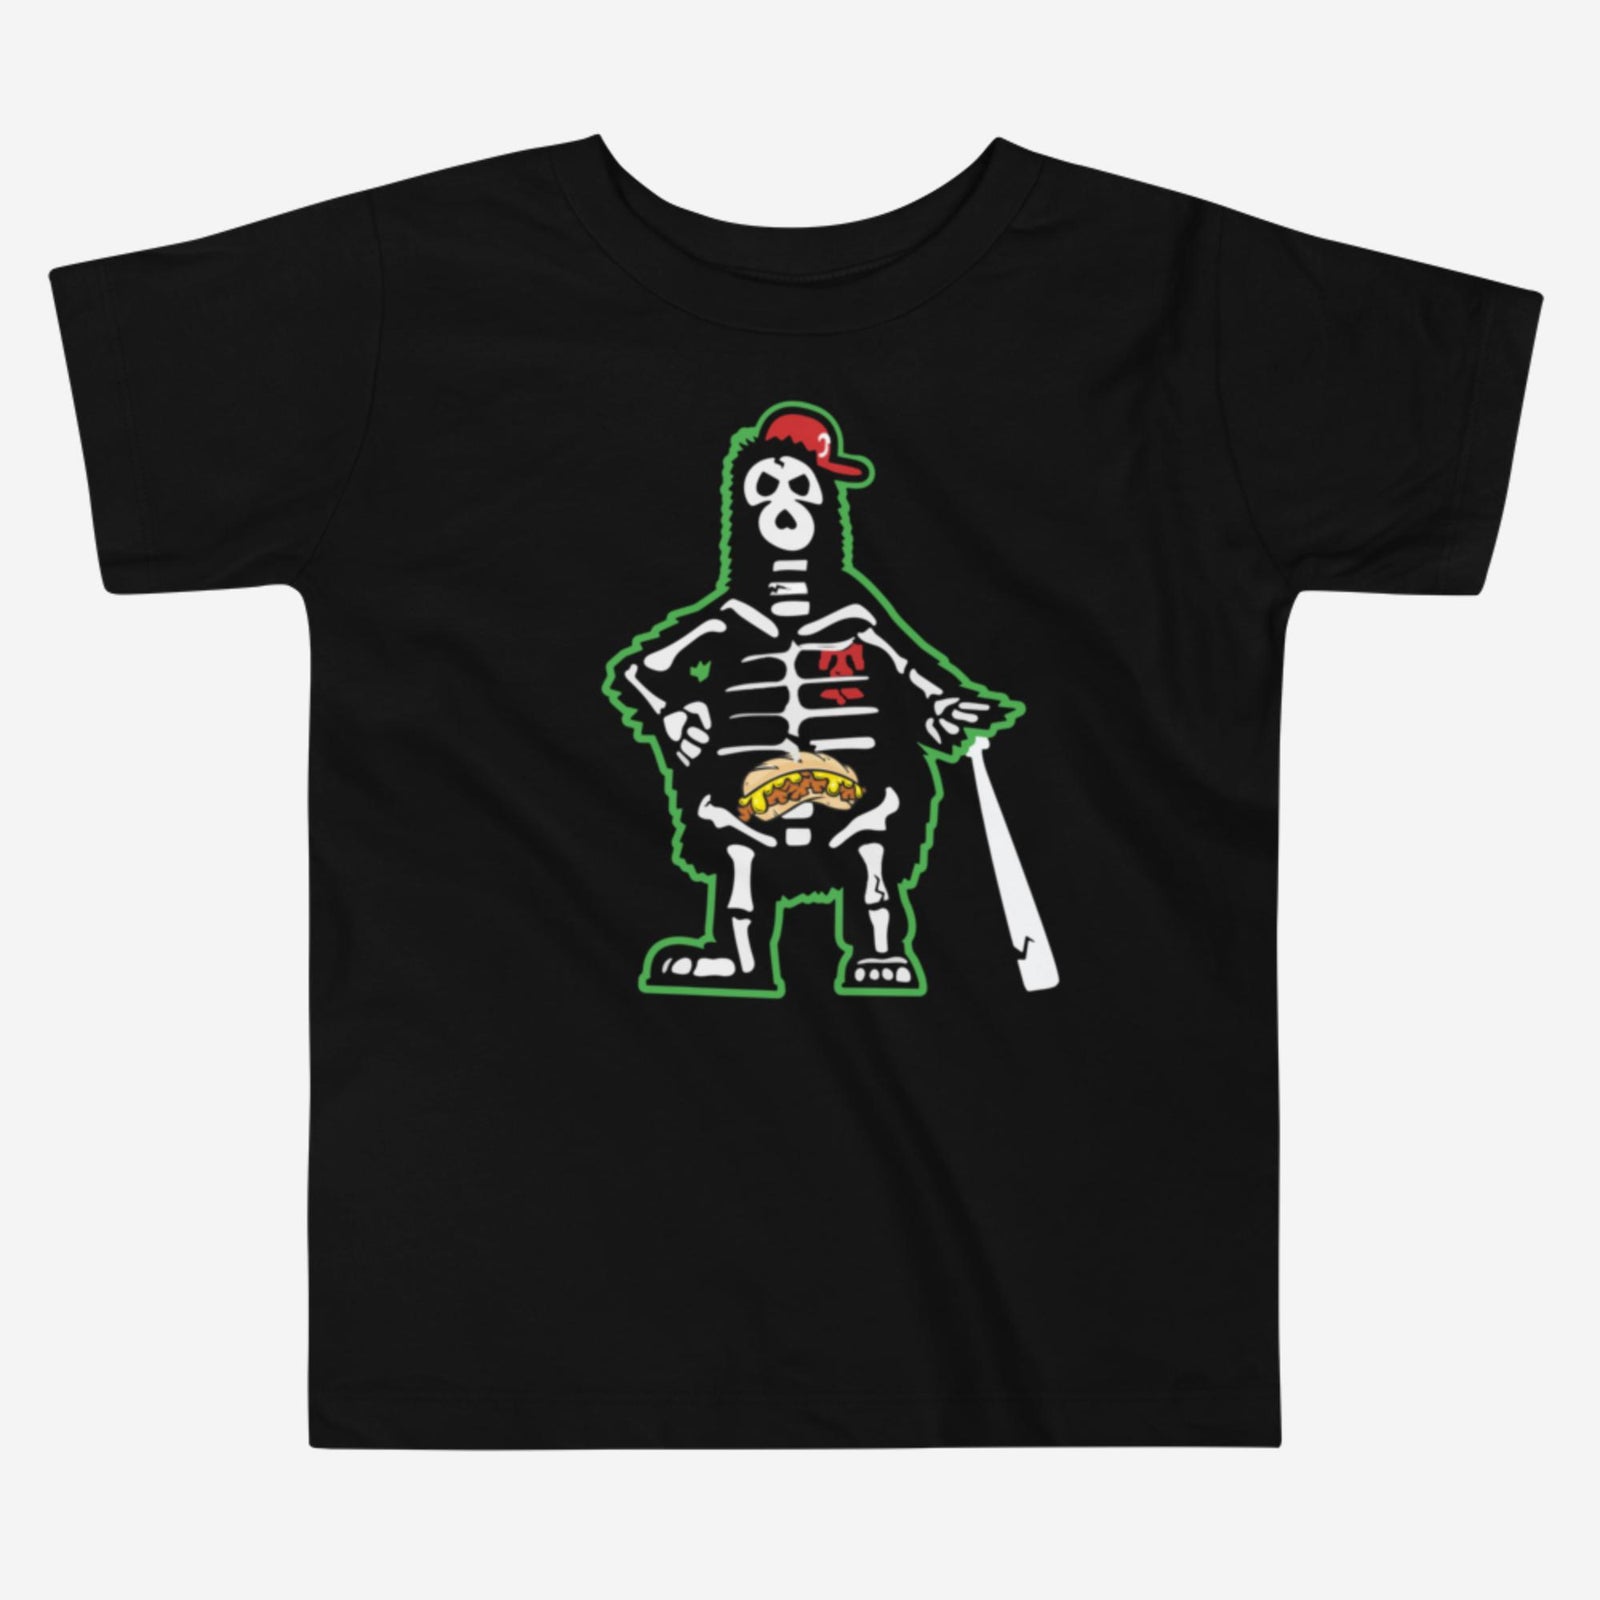 "Philly Phan to the Bone" Toddler Tee